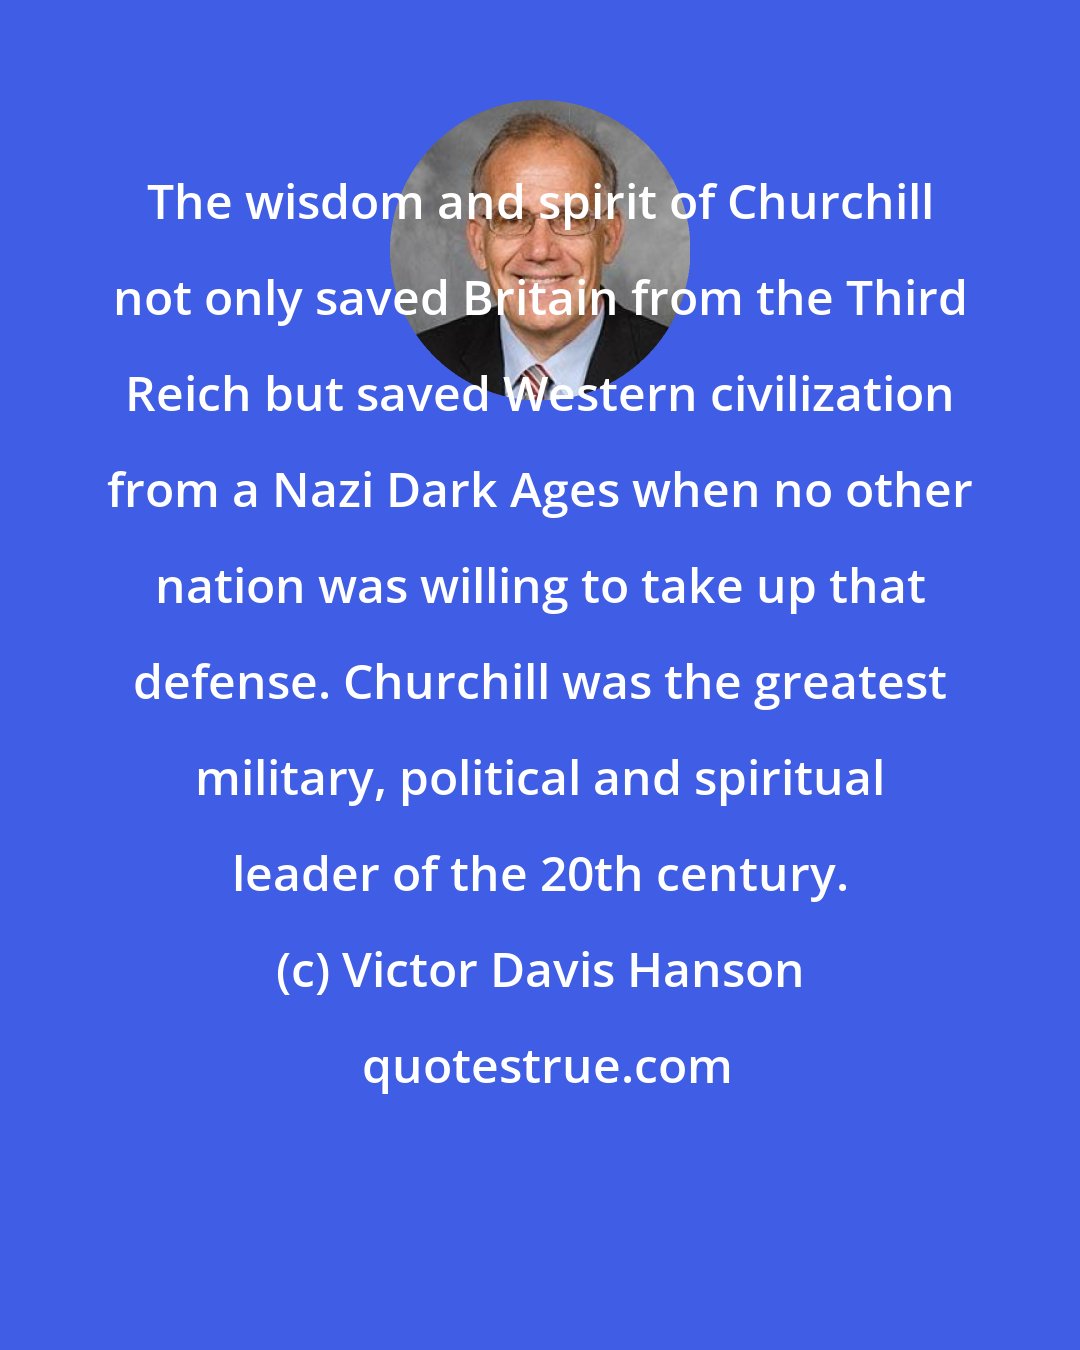 Victor Davis Hanson: The wisdom and spirit of Churchill not only saved Britain from the Third Reich but saved Western civilization from a Nazi Dark Ages when no other nation was willing to take up that defense. Churchill was the greatest military, political and spiritual leader of the 20th century.